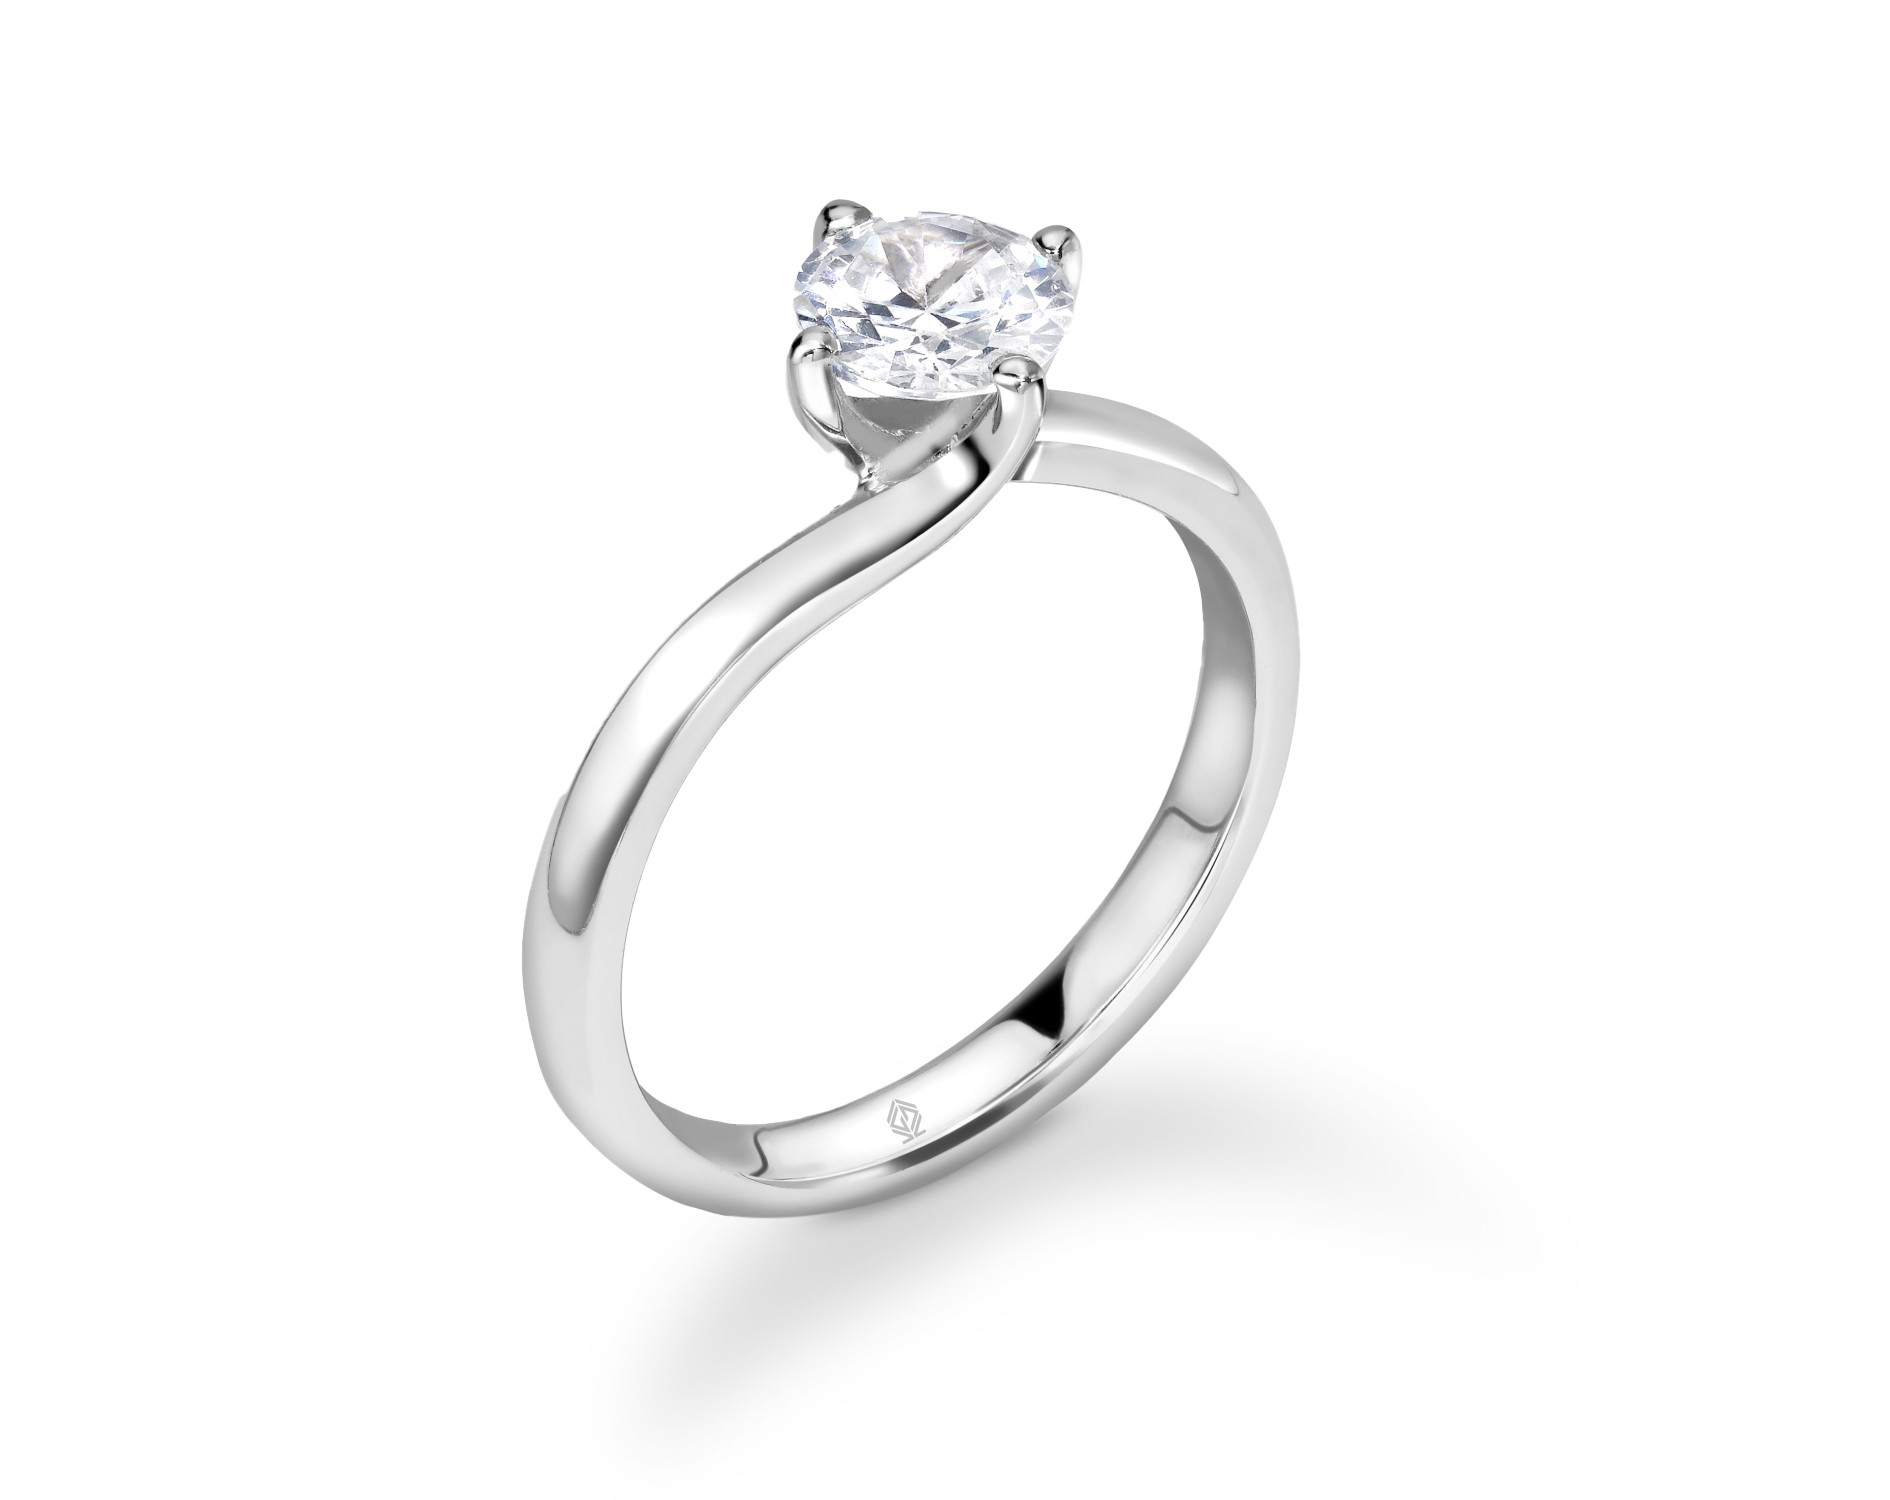 18K WHITE GOLD 4 PRONGS SOLITAIRE TWISTED HEAD ROUND CUT DIAMOND ENGAGEMENT RING